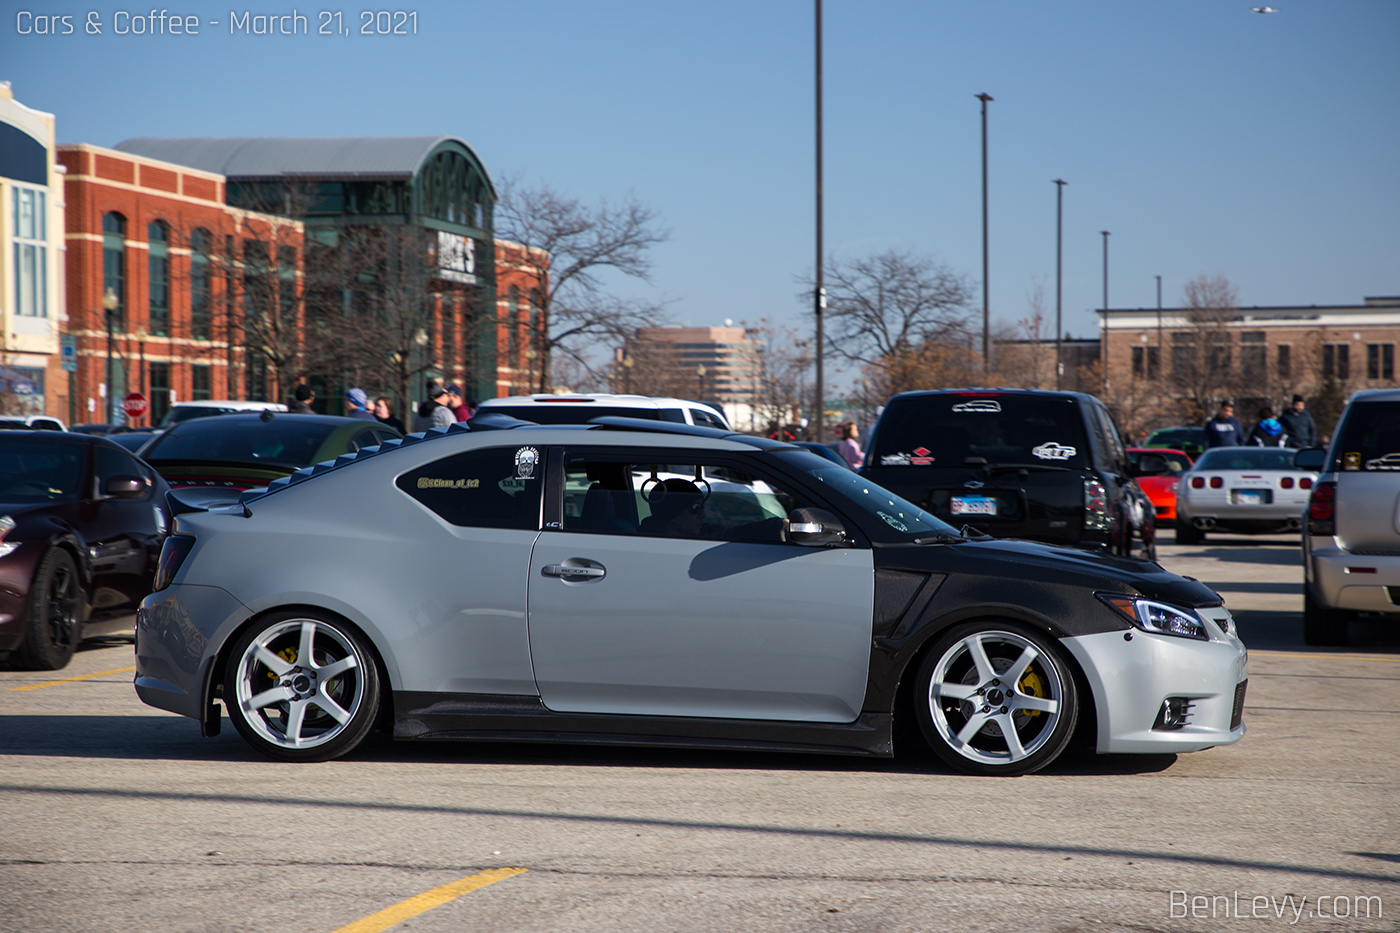 Grey Scion tC at Cars and Coffee